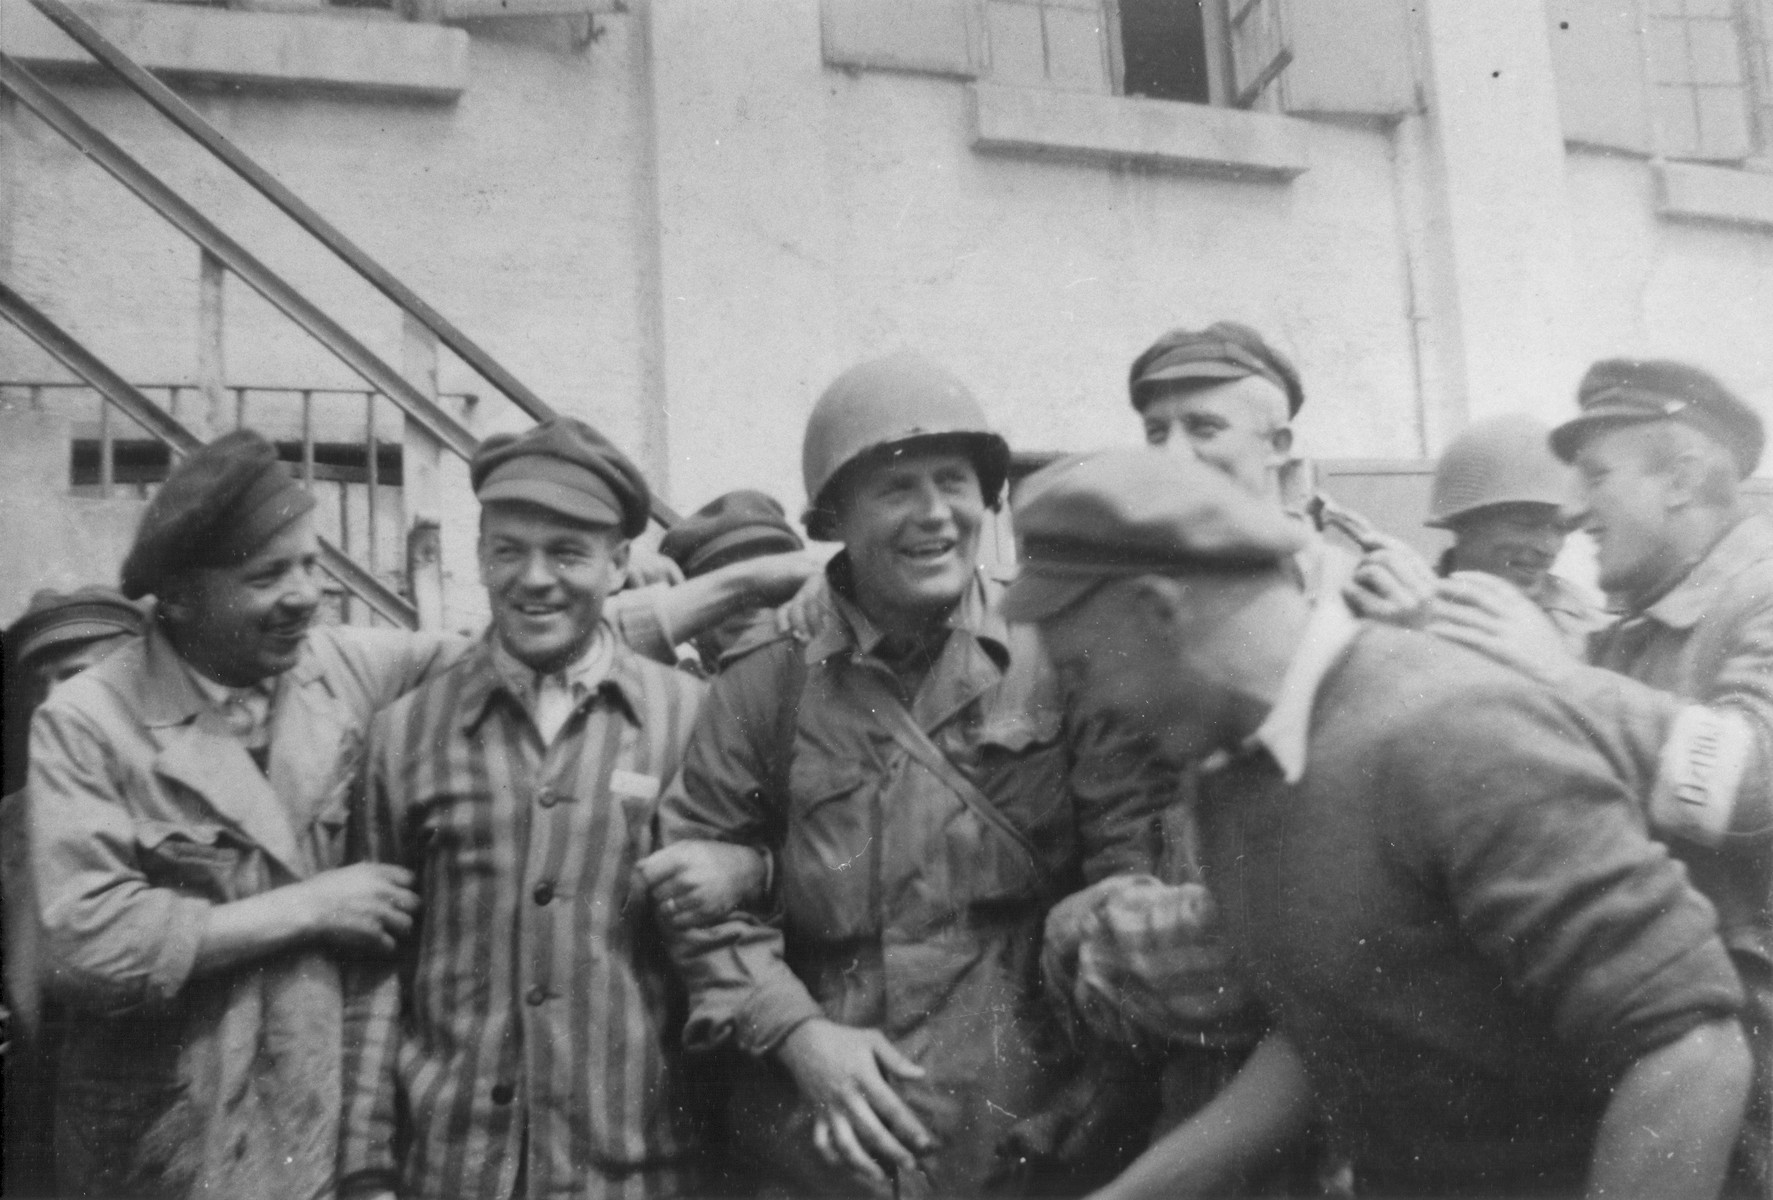 An American officer is surrounded by survivors at the newly liberated Dachau concentration camp.